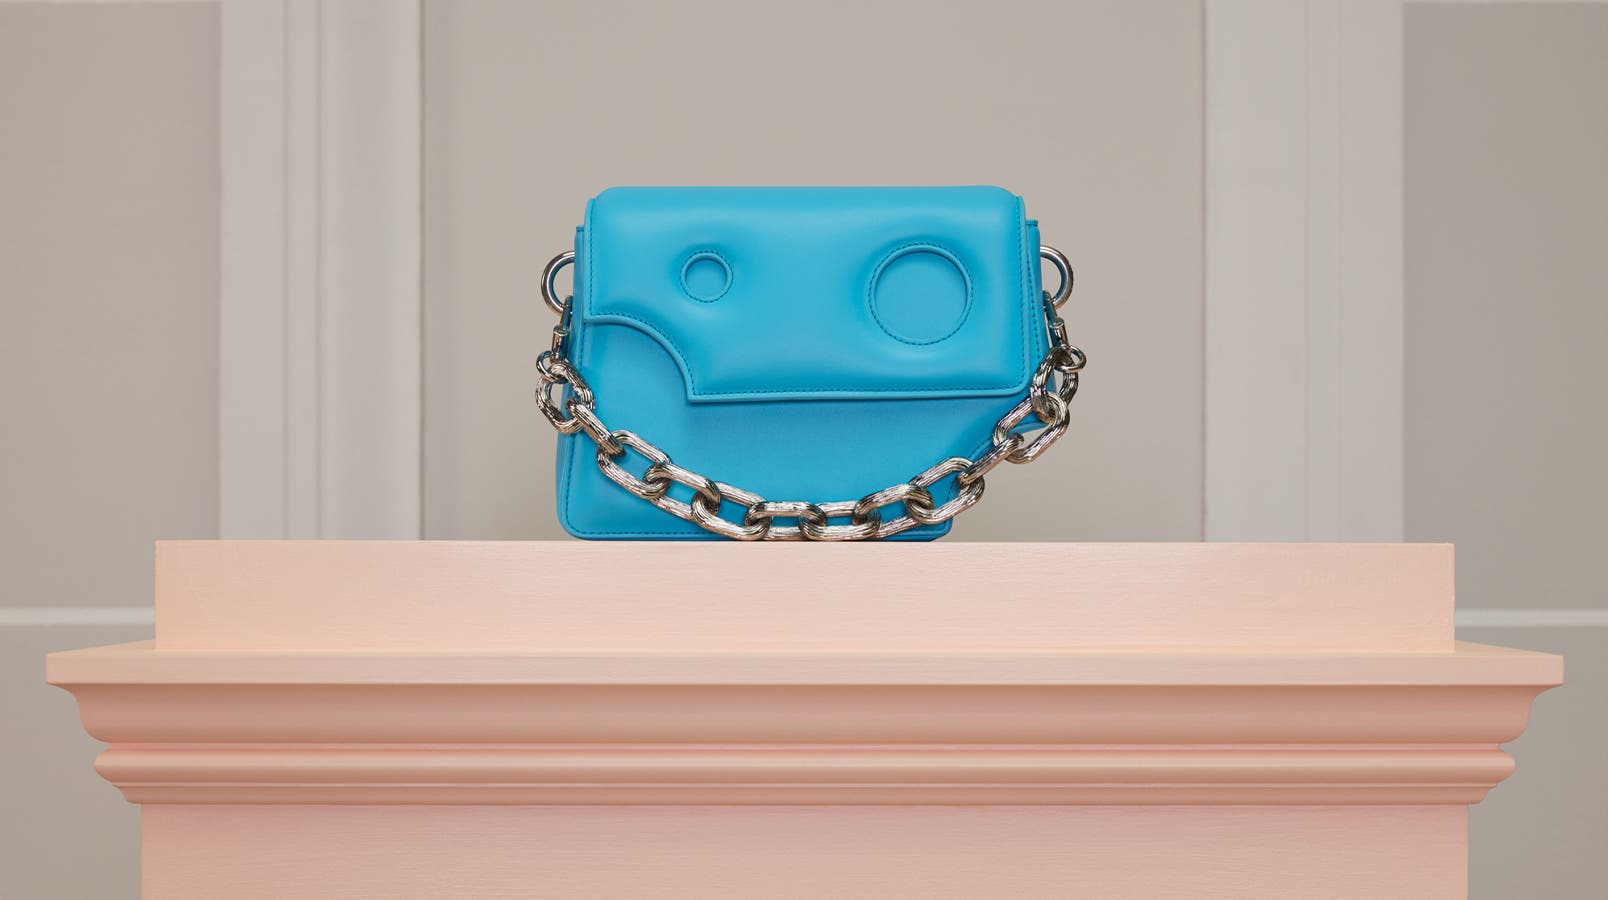 A blue bag with a heavy chain.